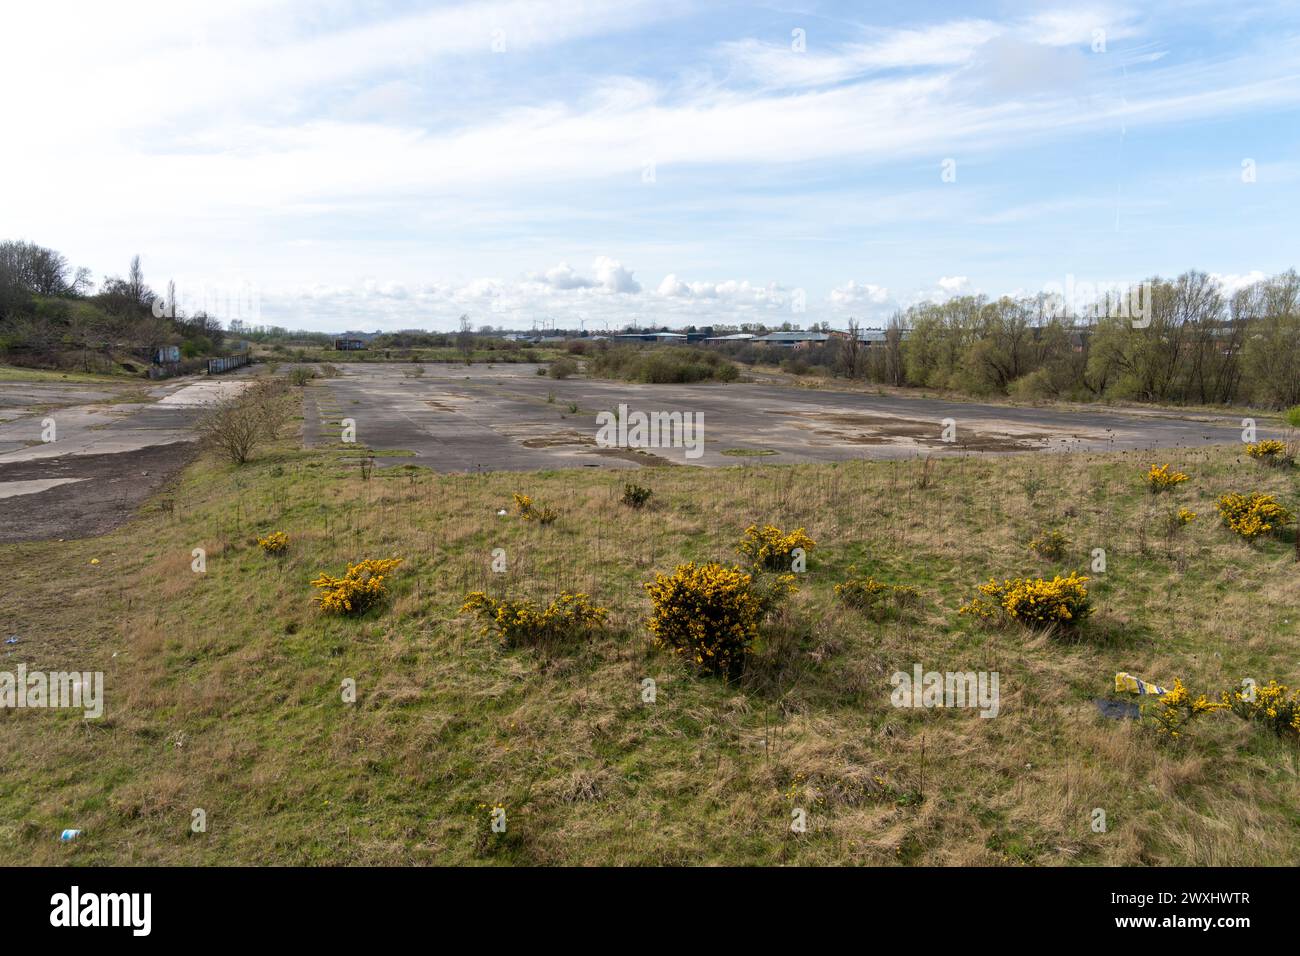 Site future Crown Works Studios in Sunderland, UK by River Wear in Pallion. FulwellCain Studios plan one of the largest filmmaking complexes in Europe Stock Photo